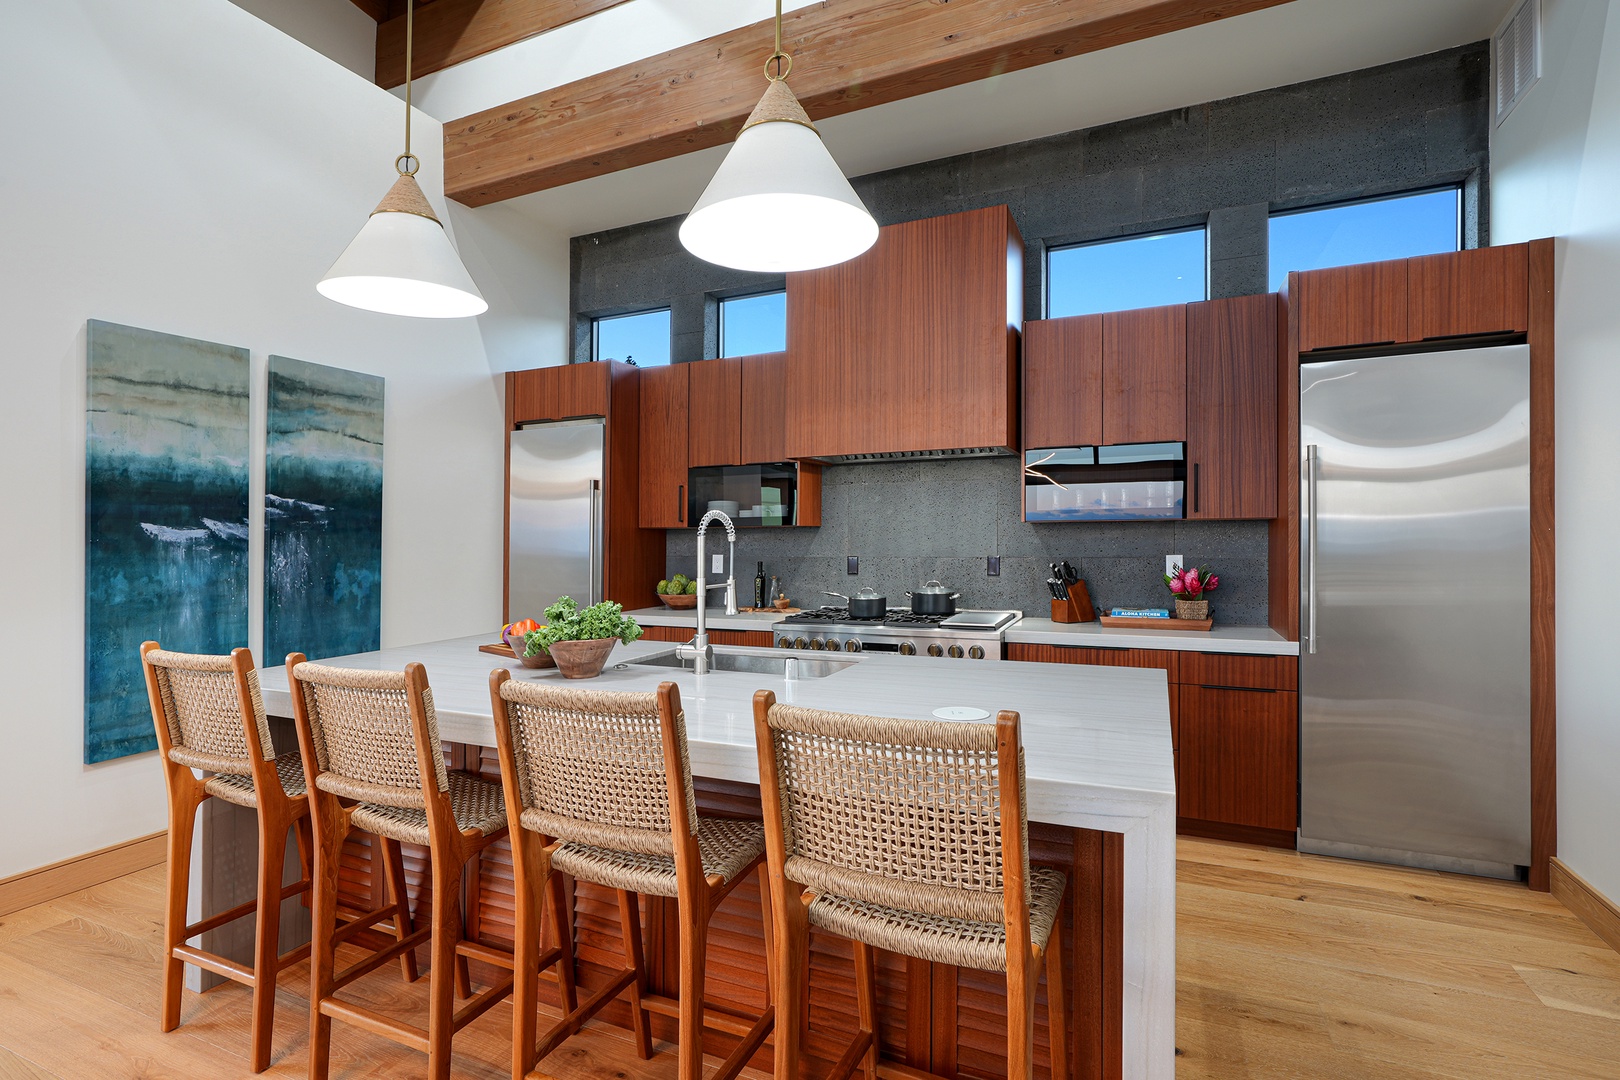 Koloa Vacation Rentals, Hale Keaka at Kukui'ula - Gather around this inviting kitchen island, where warm wood tones and modern design create the perfect setting for socializing and culinary creativity.